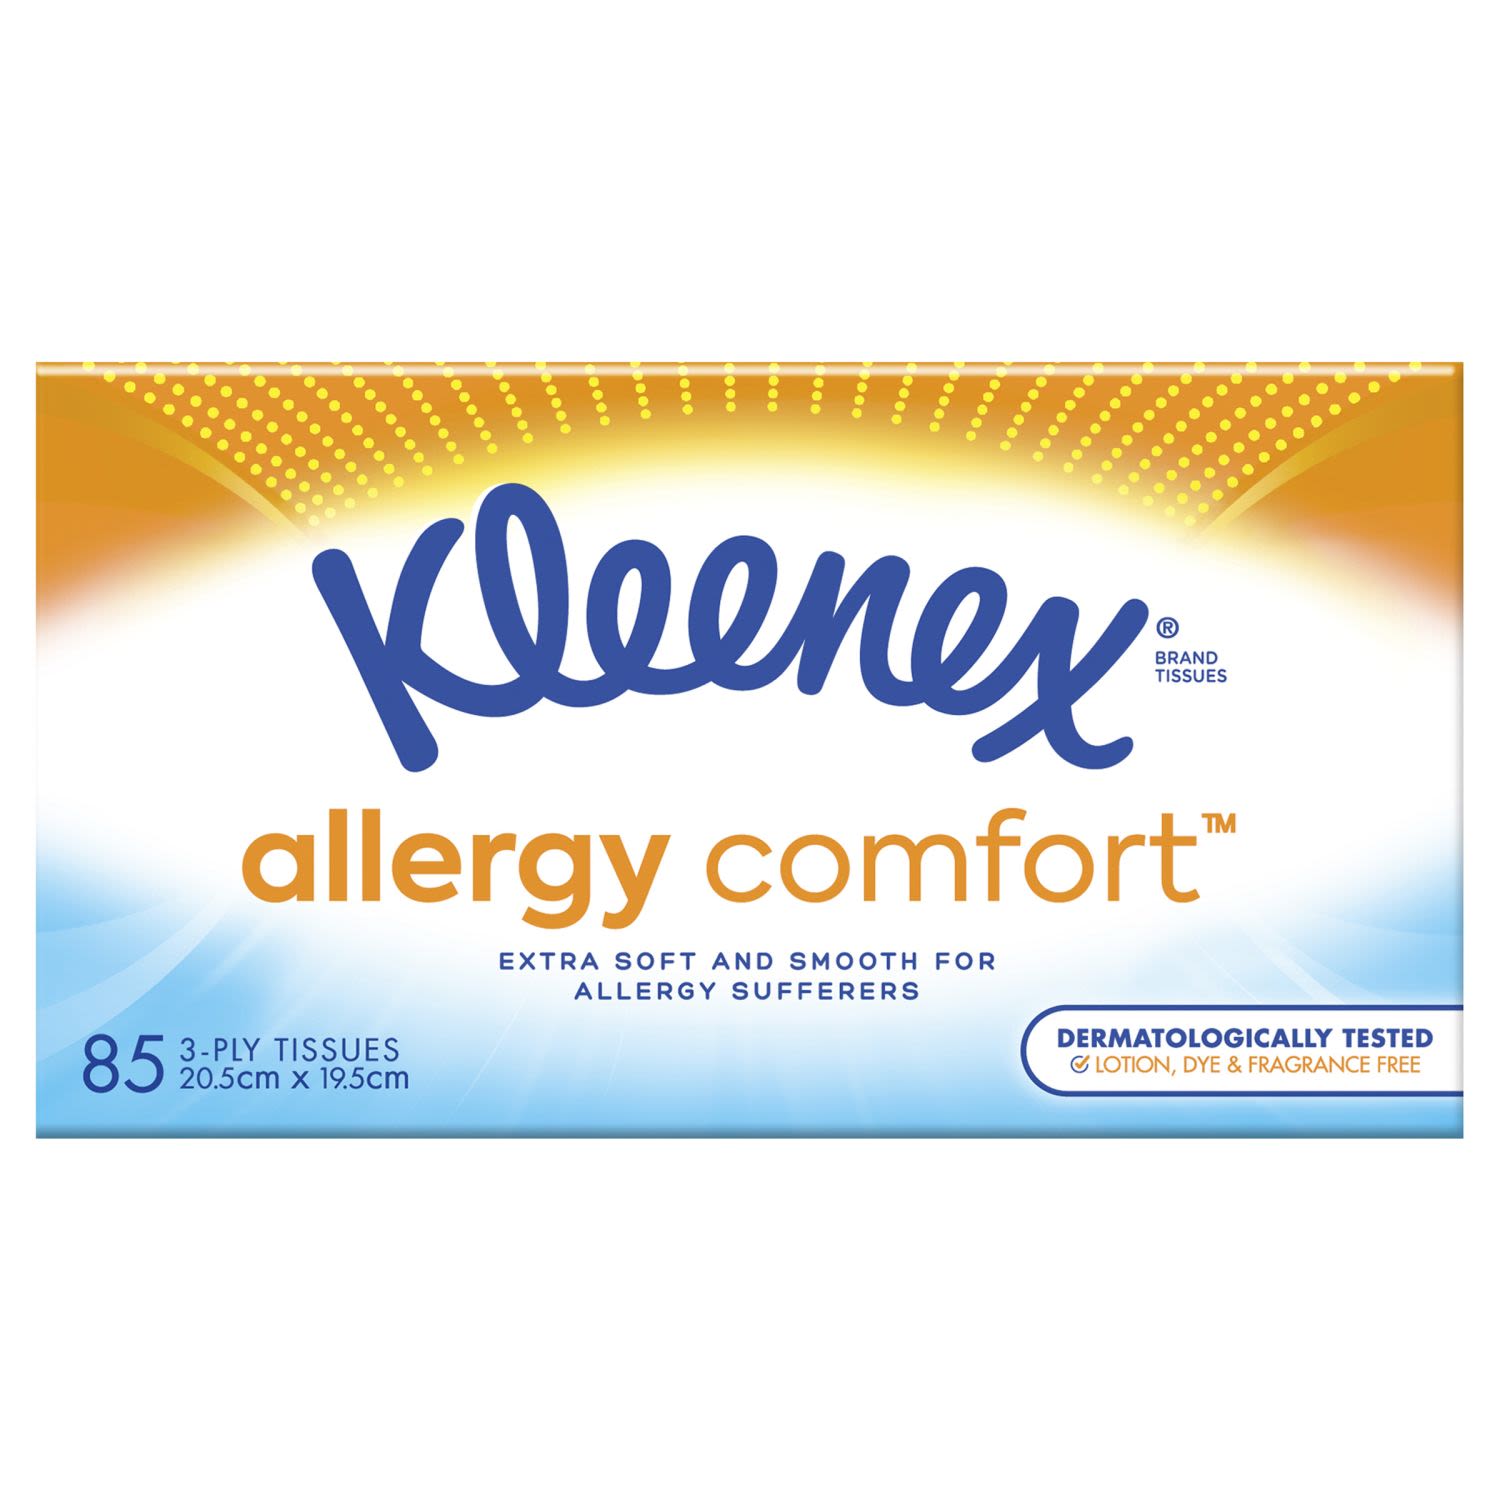 Kleenex Allergy Comfort Facial Tissues have reduced linting for allergy sufferers.

Extra soft and smooth.

Dermatologically tested and Hypoallergenic.

Lotion, Dye & Fragrance free.

3-ply thickness, 85 sheets per box, 20.5cm x 19.5cm.

Our Kleenex Facial Tissues are Aussie made and we’re proud of it; they’ve been made at our Millicent mill in South Australia since 1966. This means support for local communities, including hundreds of local employees and their families, each year.

FSC® Certified, ensuring responsible forest management, meeting the most rigorous environmental and social standard for responsible forest management.<br /> <br />